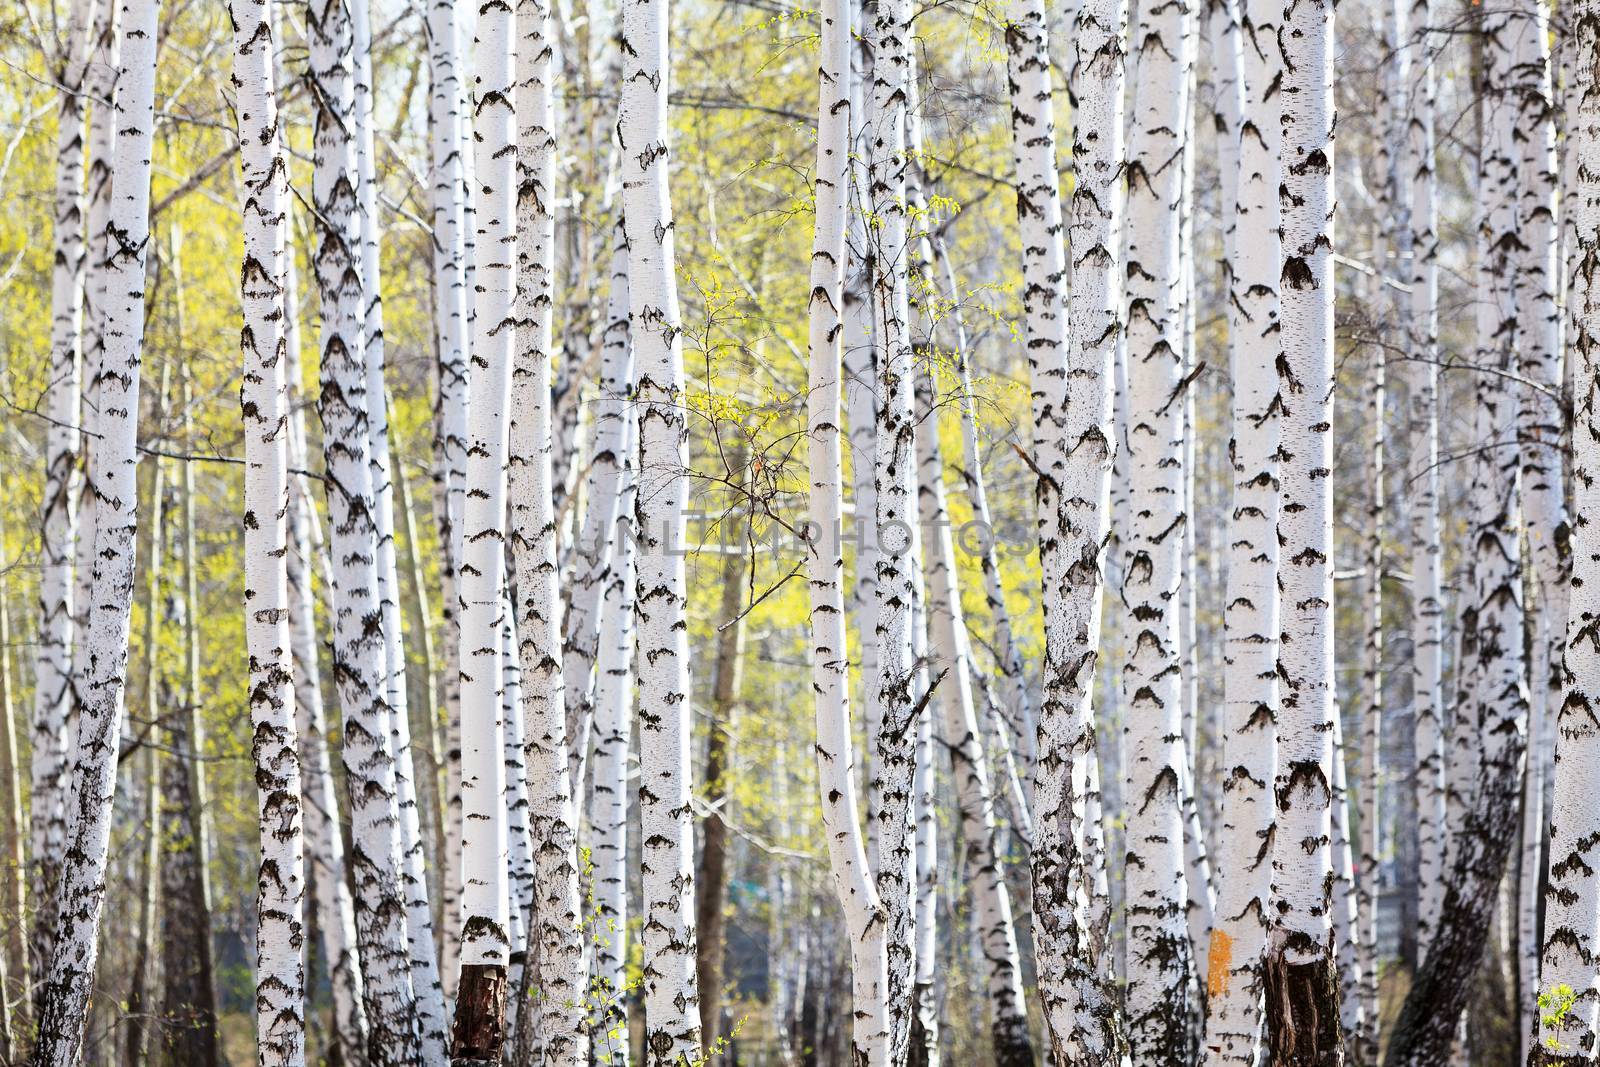 Spring in the birch forest